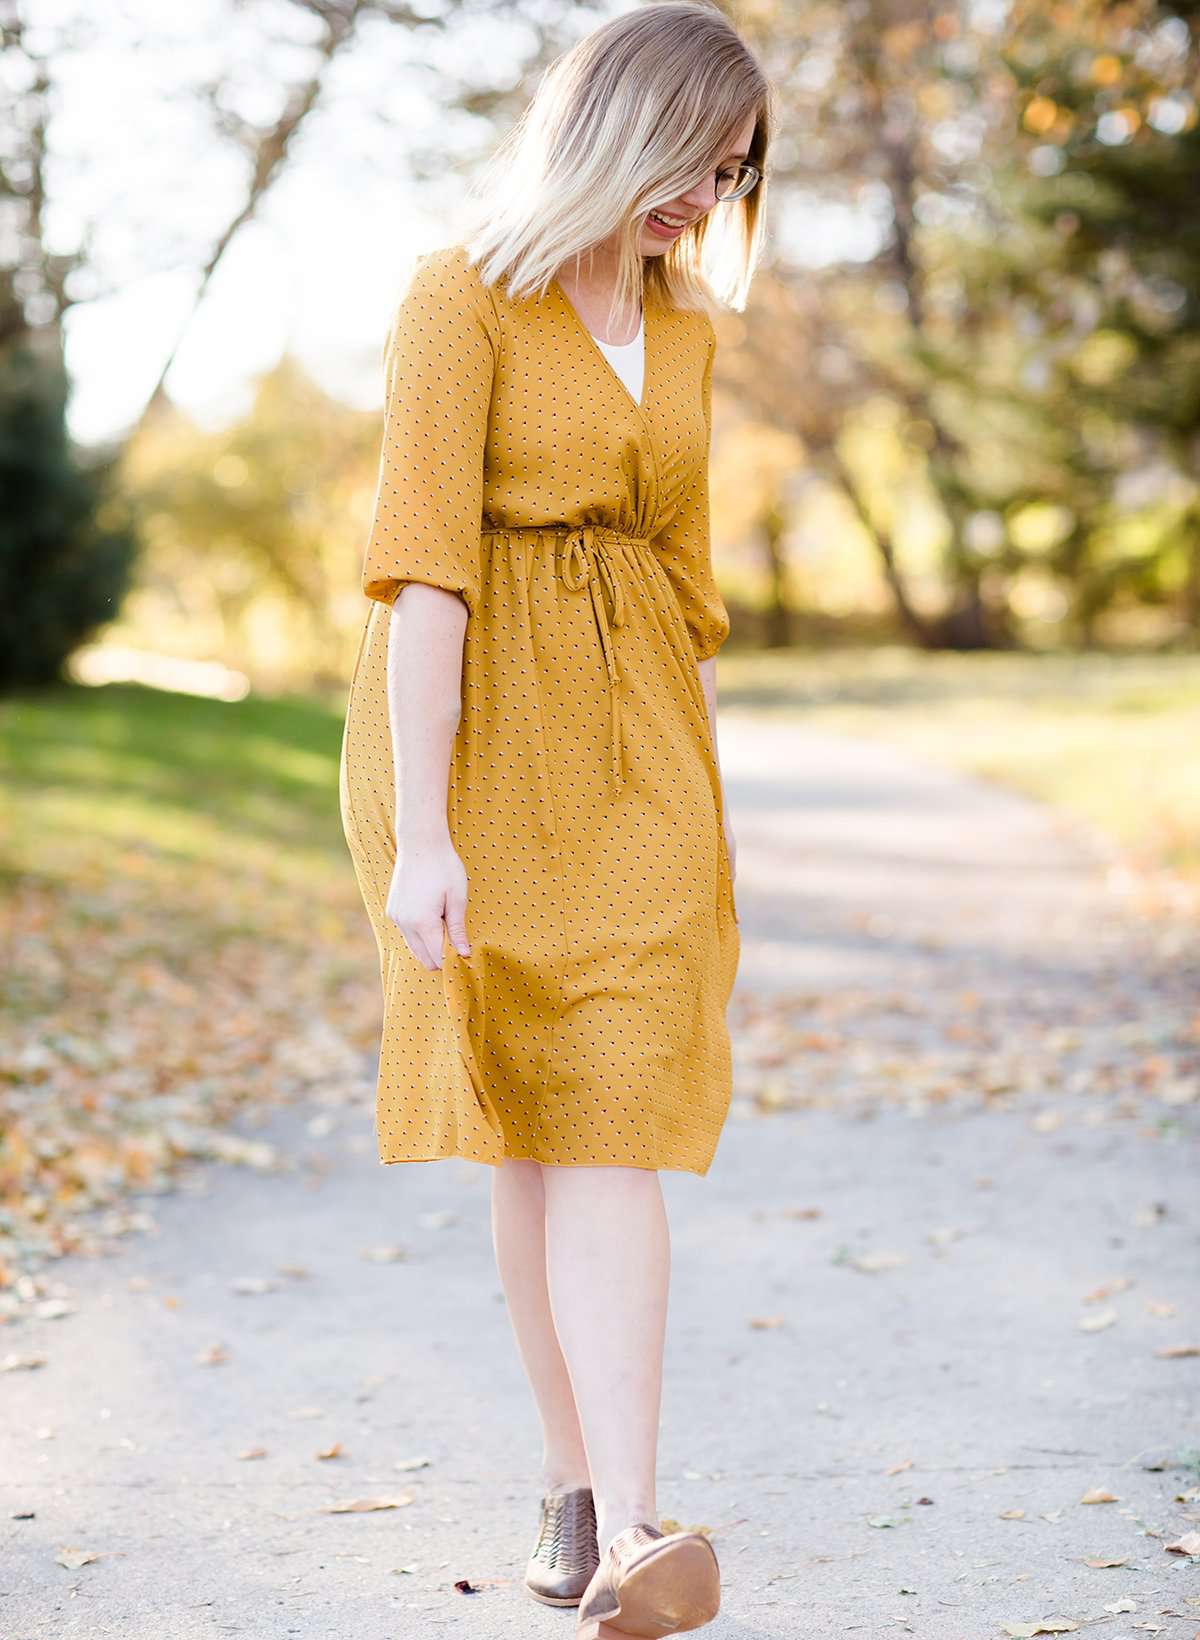 Young woman wearing a modest golden printed midi dress that has a faux wrap and is nursing friendly